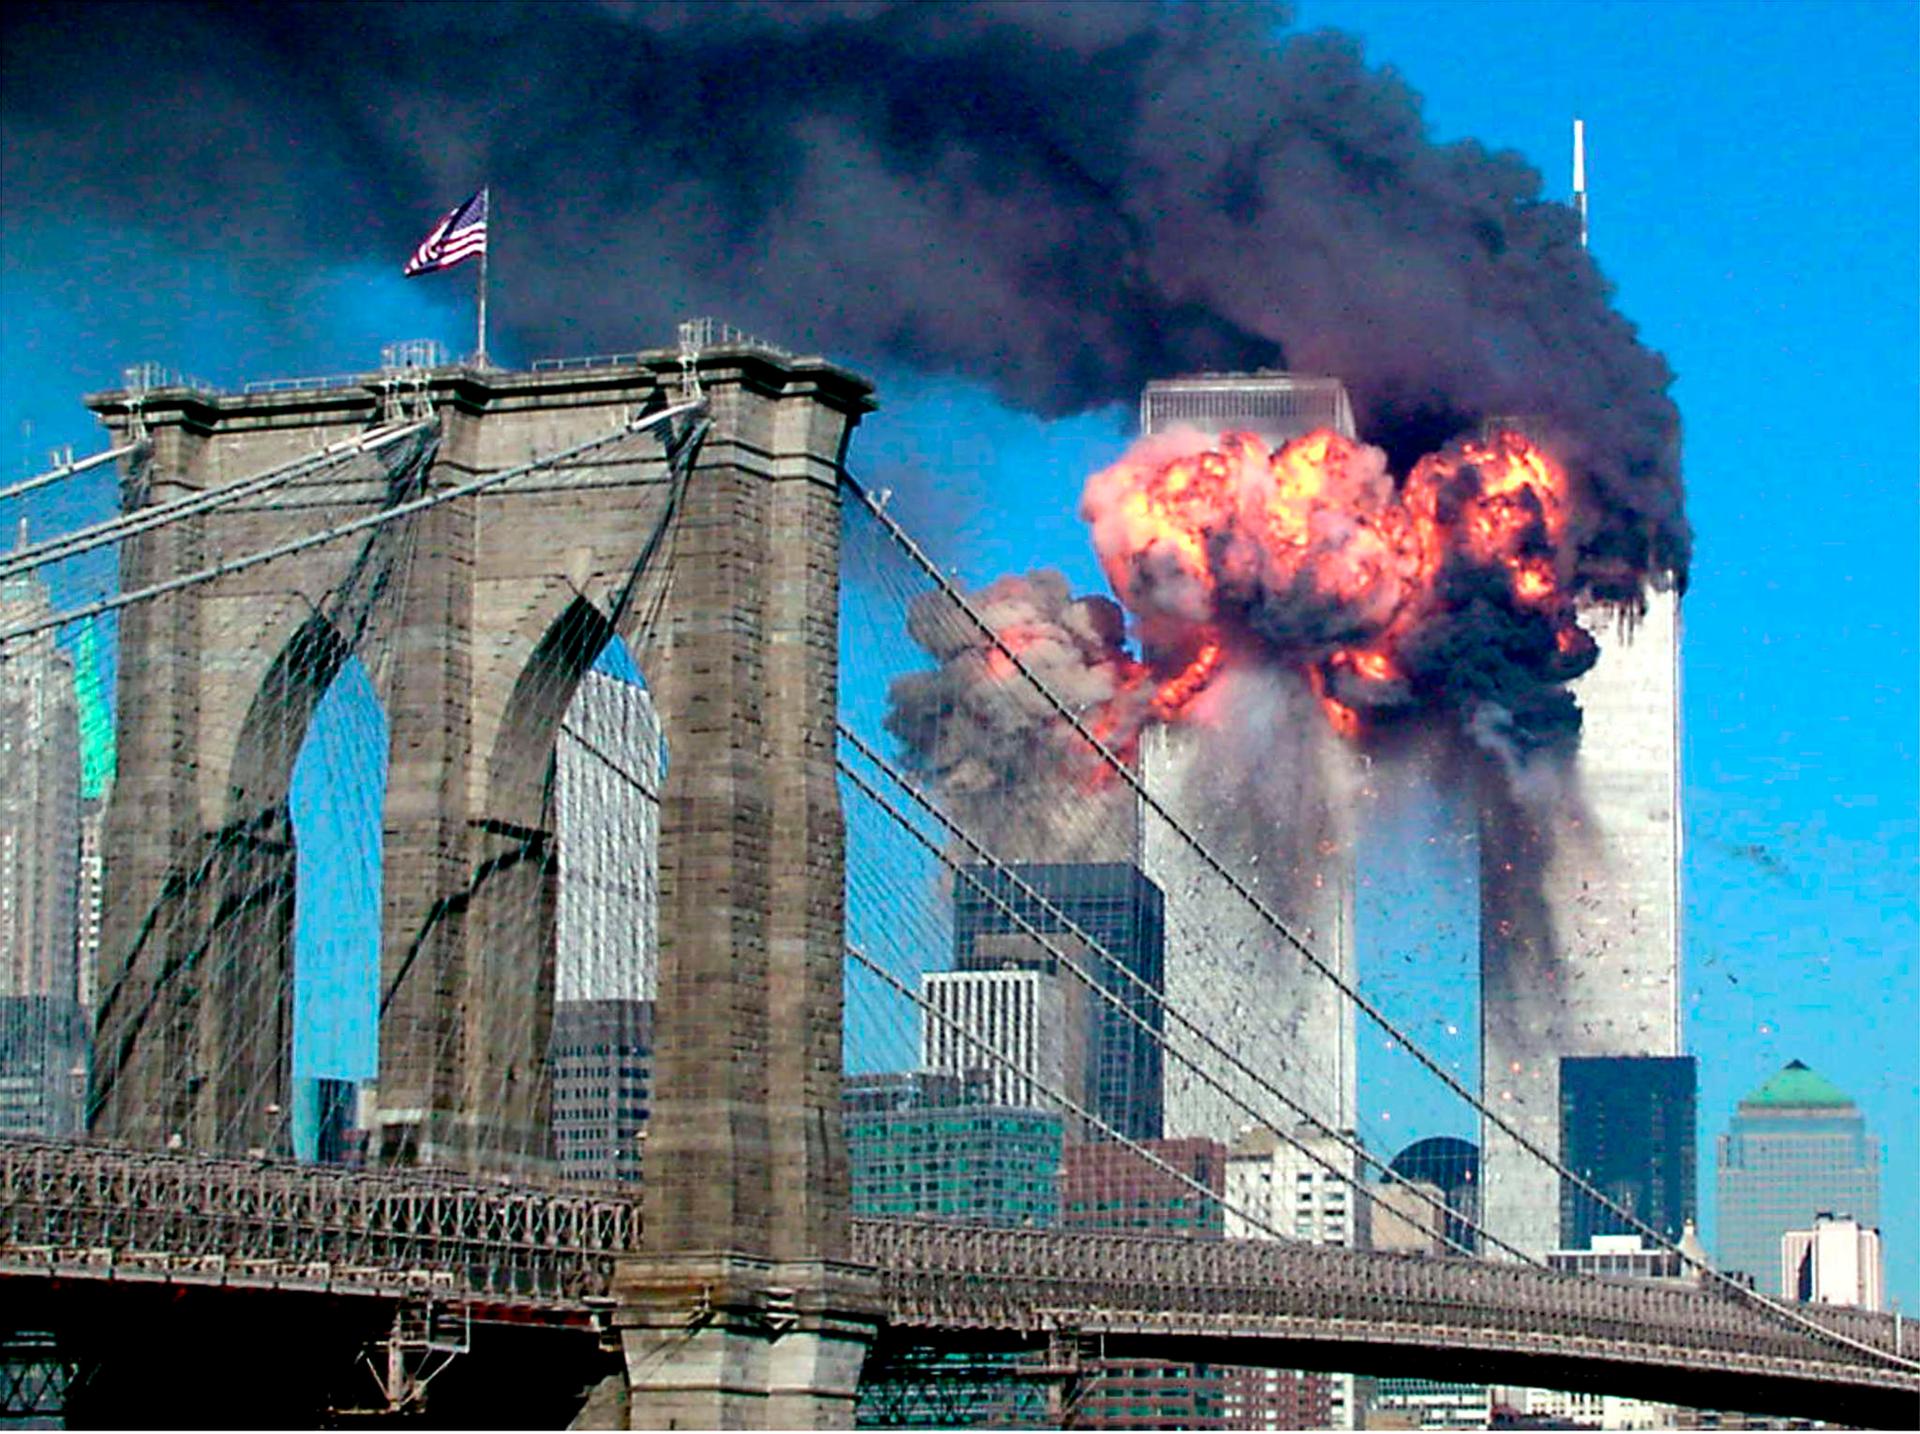 The second tower of the World Trade Centre explodes after being hit by a hijacked airplane. A bridge with an American flag flying is in the foreground.